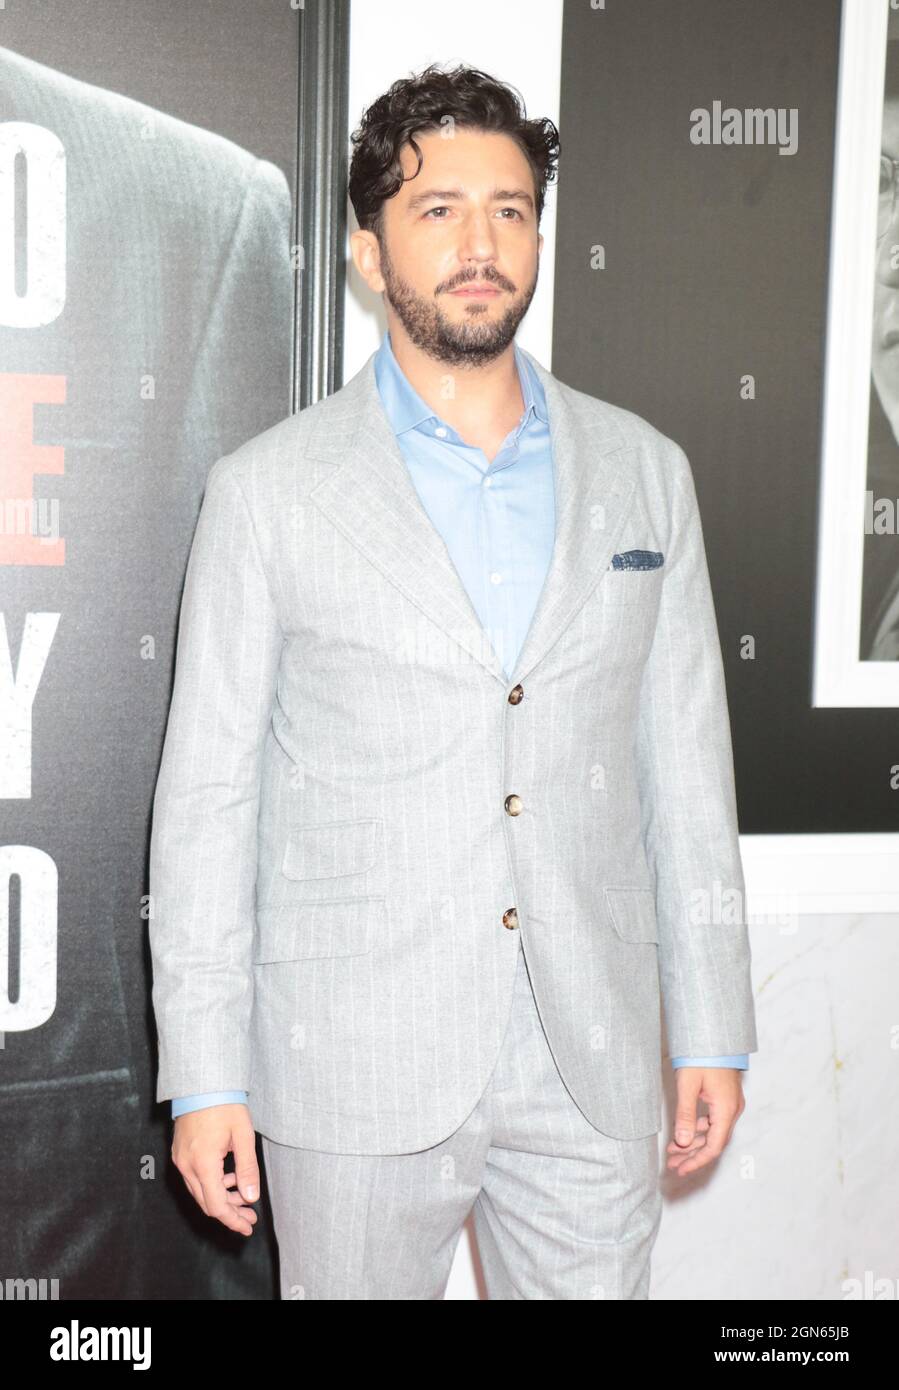 New York, NY, USA. 22nd Sep, 2021. John Magaro at the Tribeca Fall Preview Premiere Of The Many Saints of Newark at The Beacon Theatre in New York City on September 22, 2021. Credit: Rw/Media Punch/Alamy Live News Stock Photo